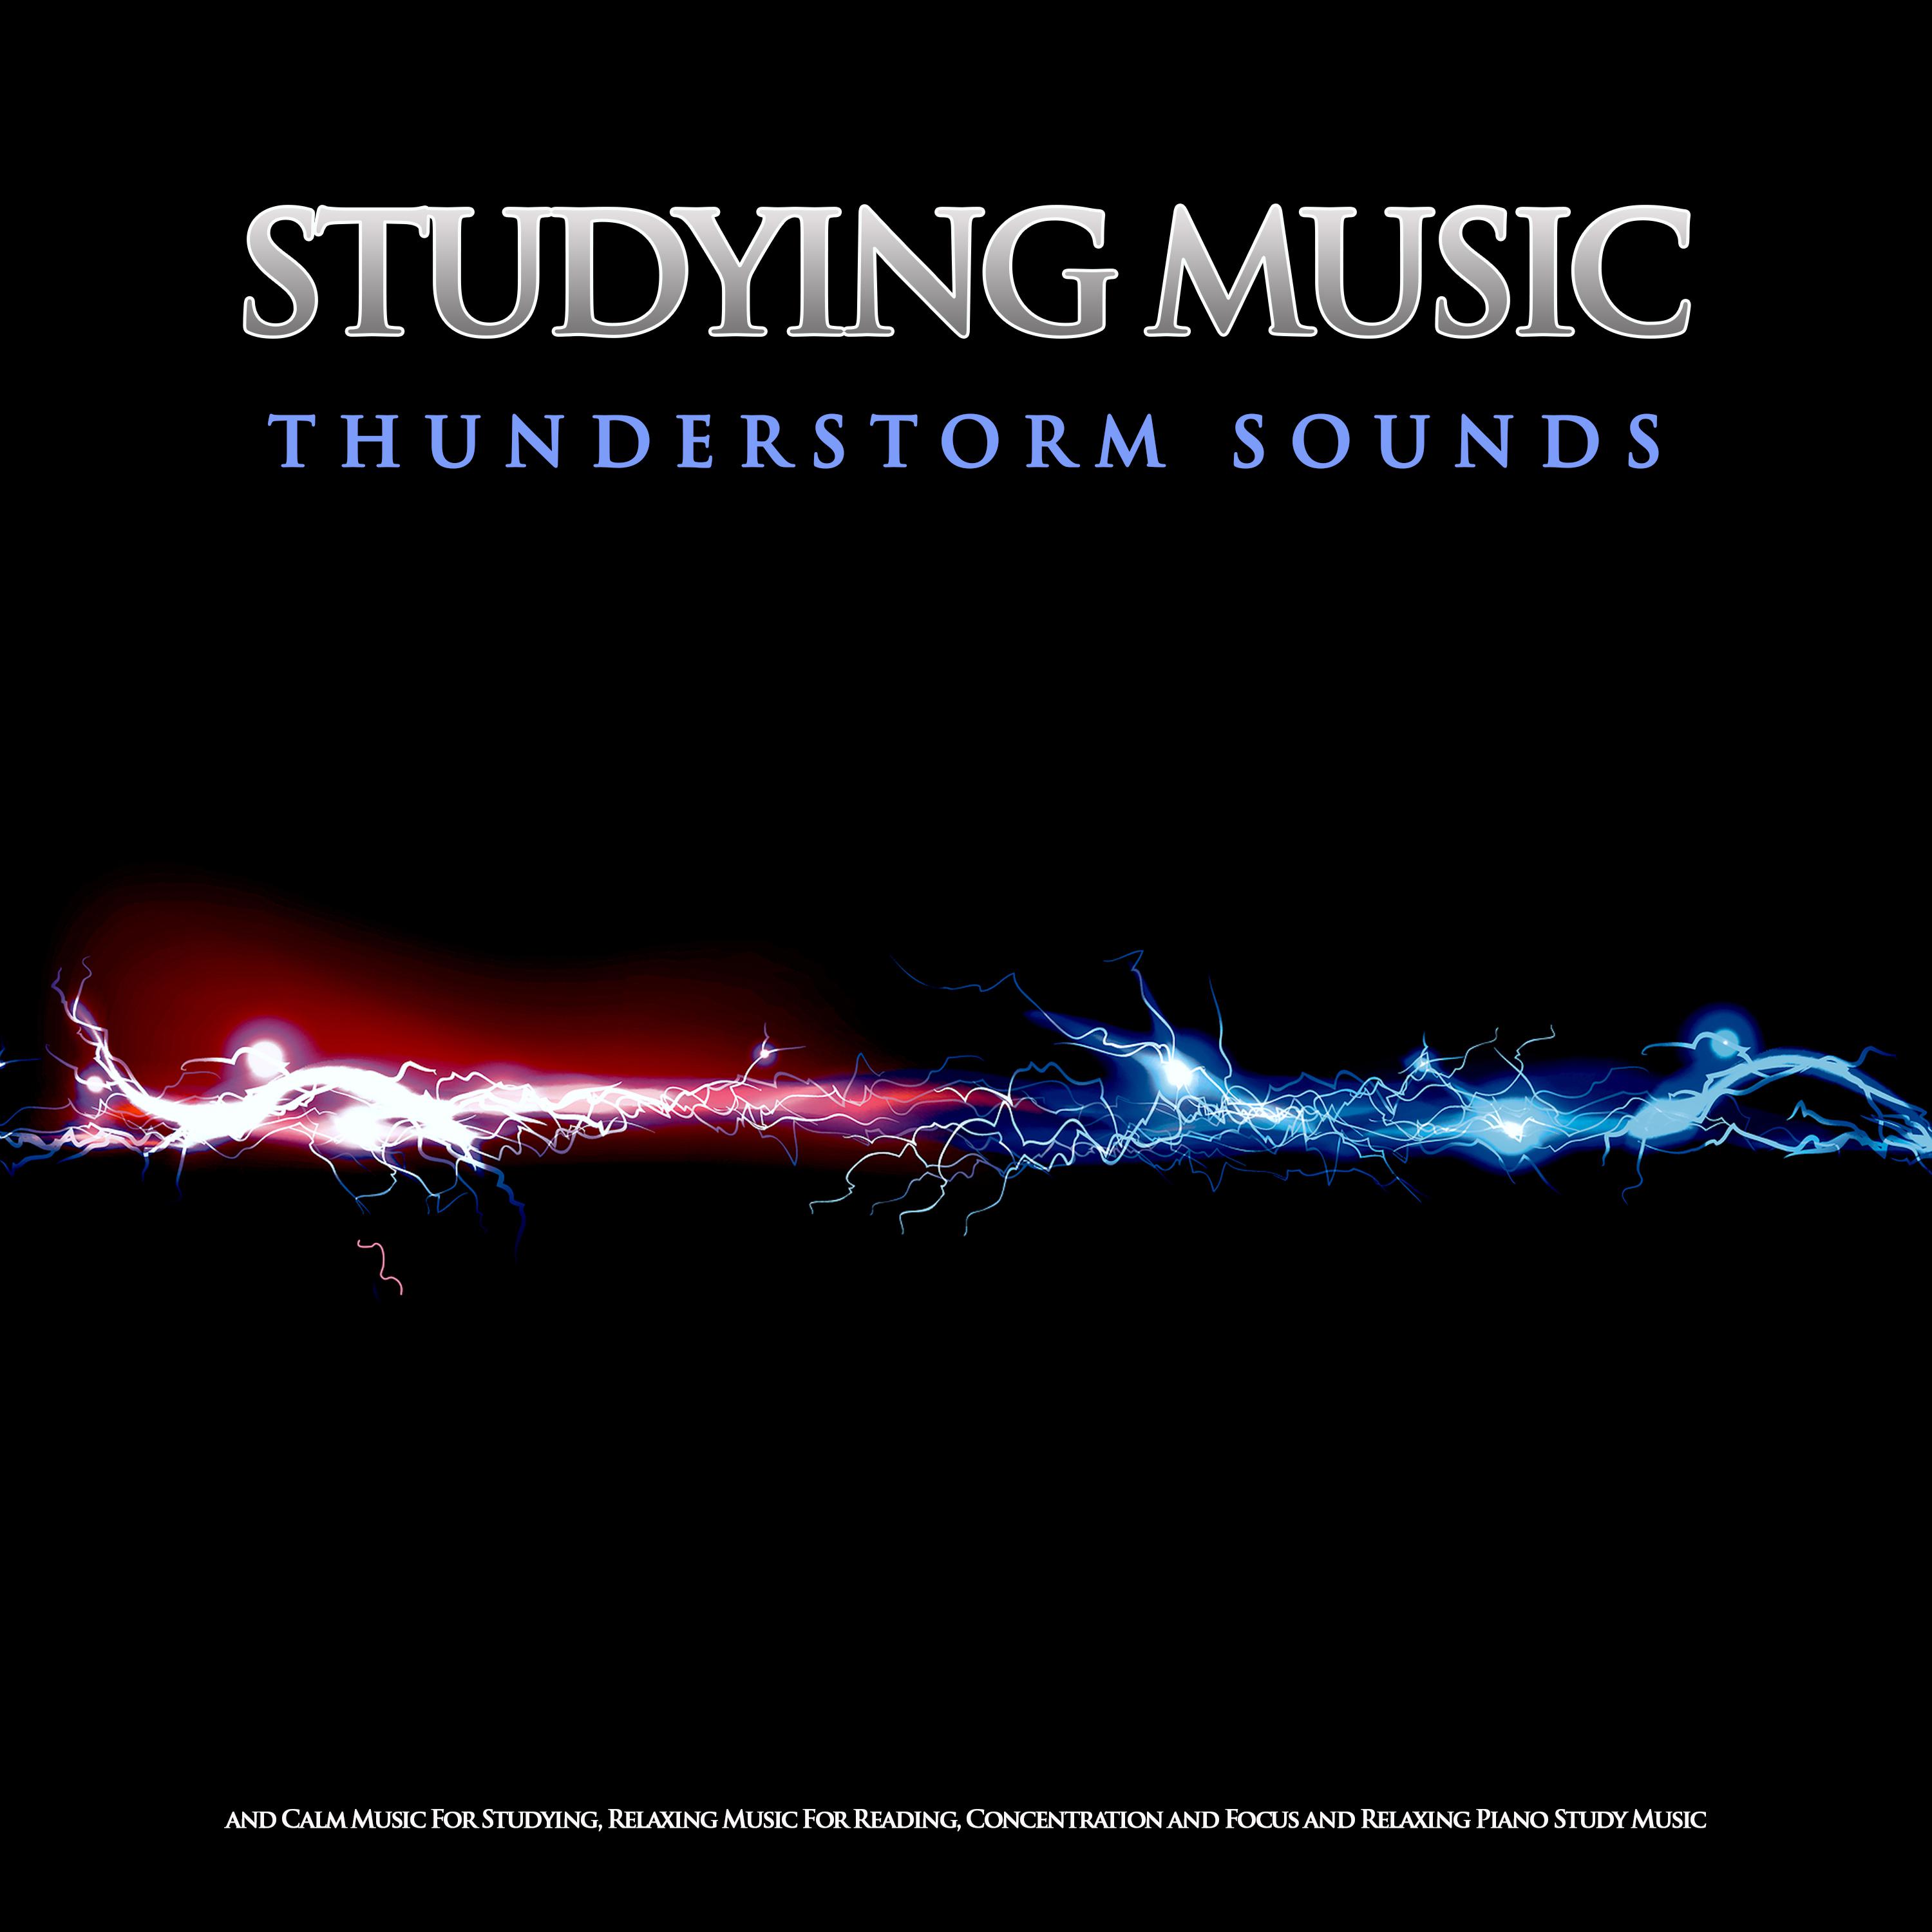 Sounds of a Thunderstorm Studying Music